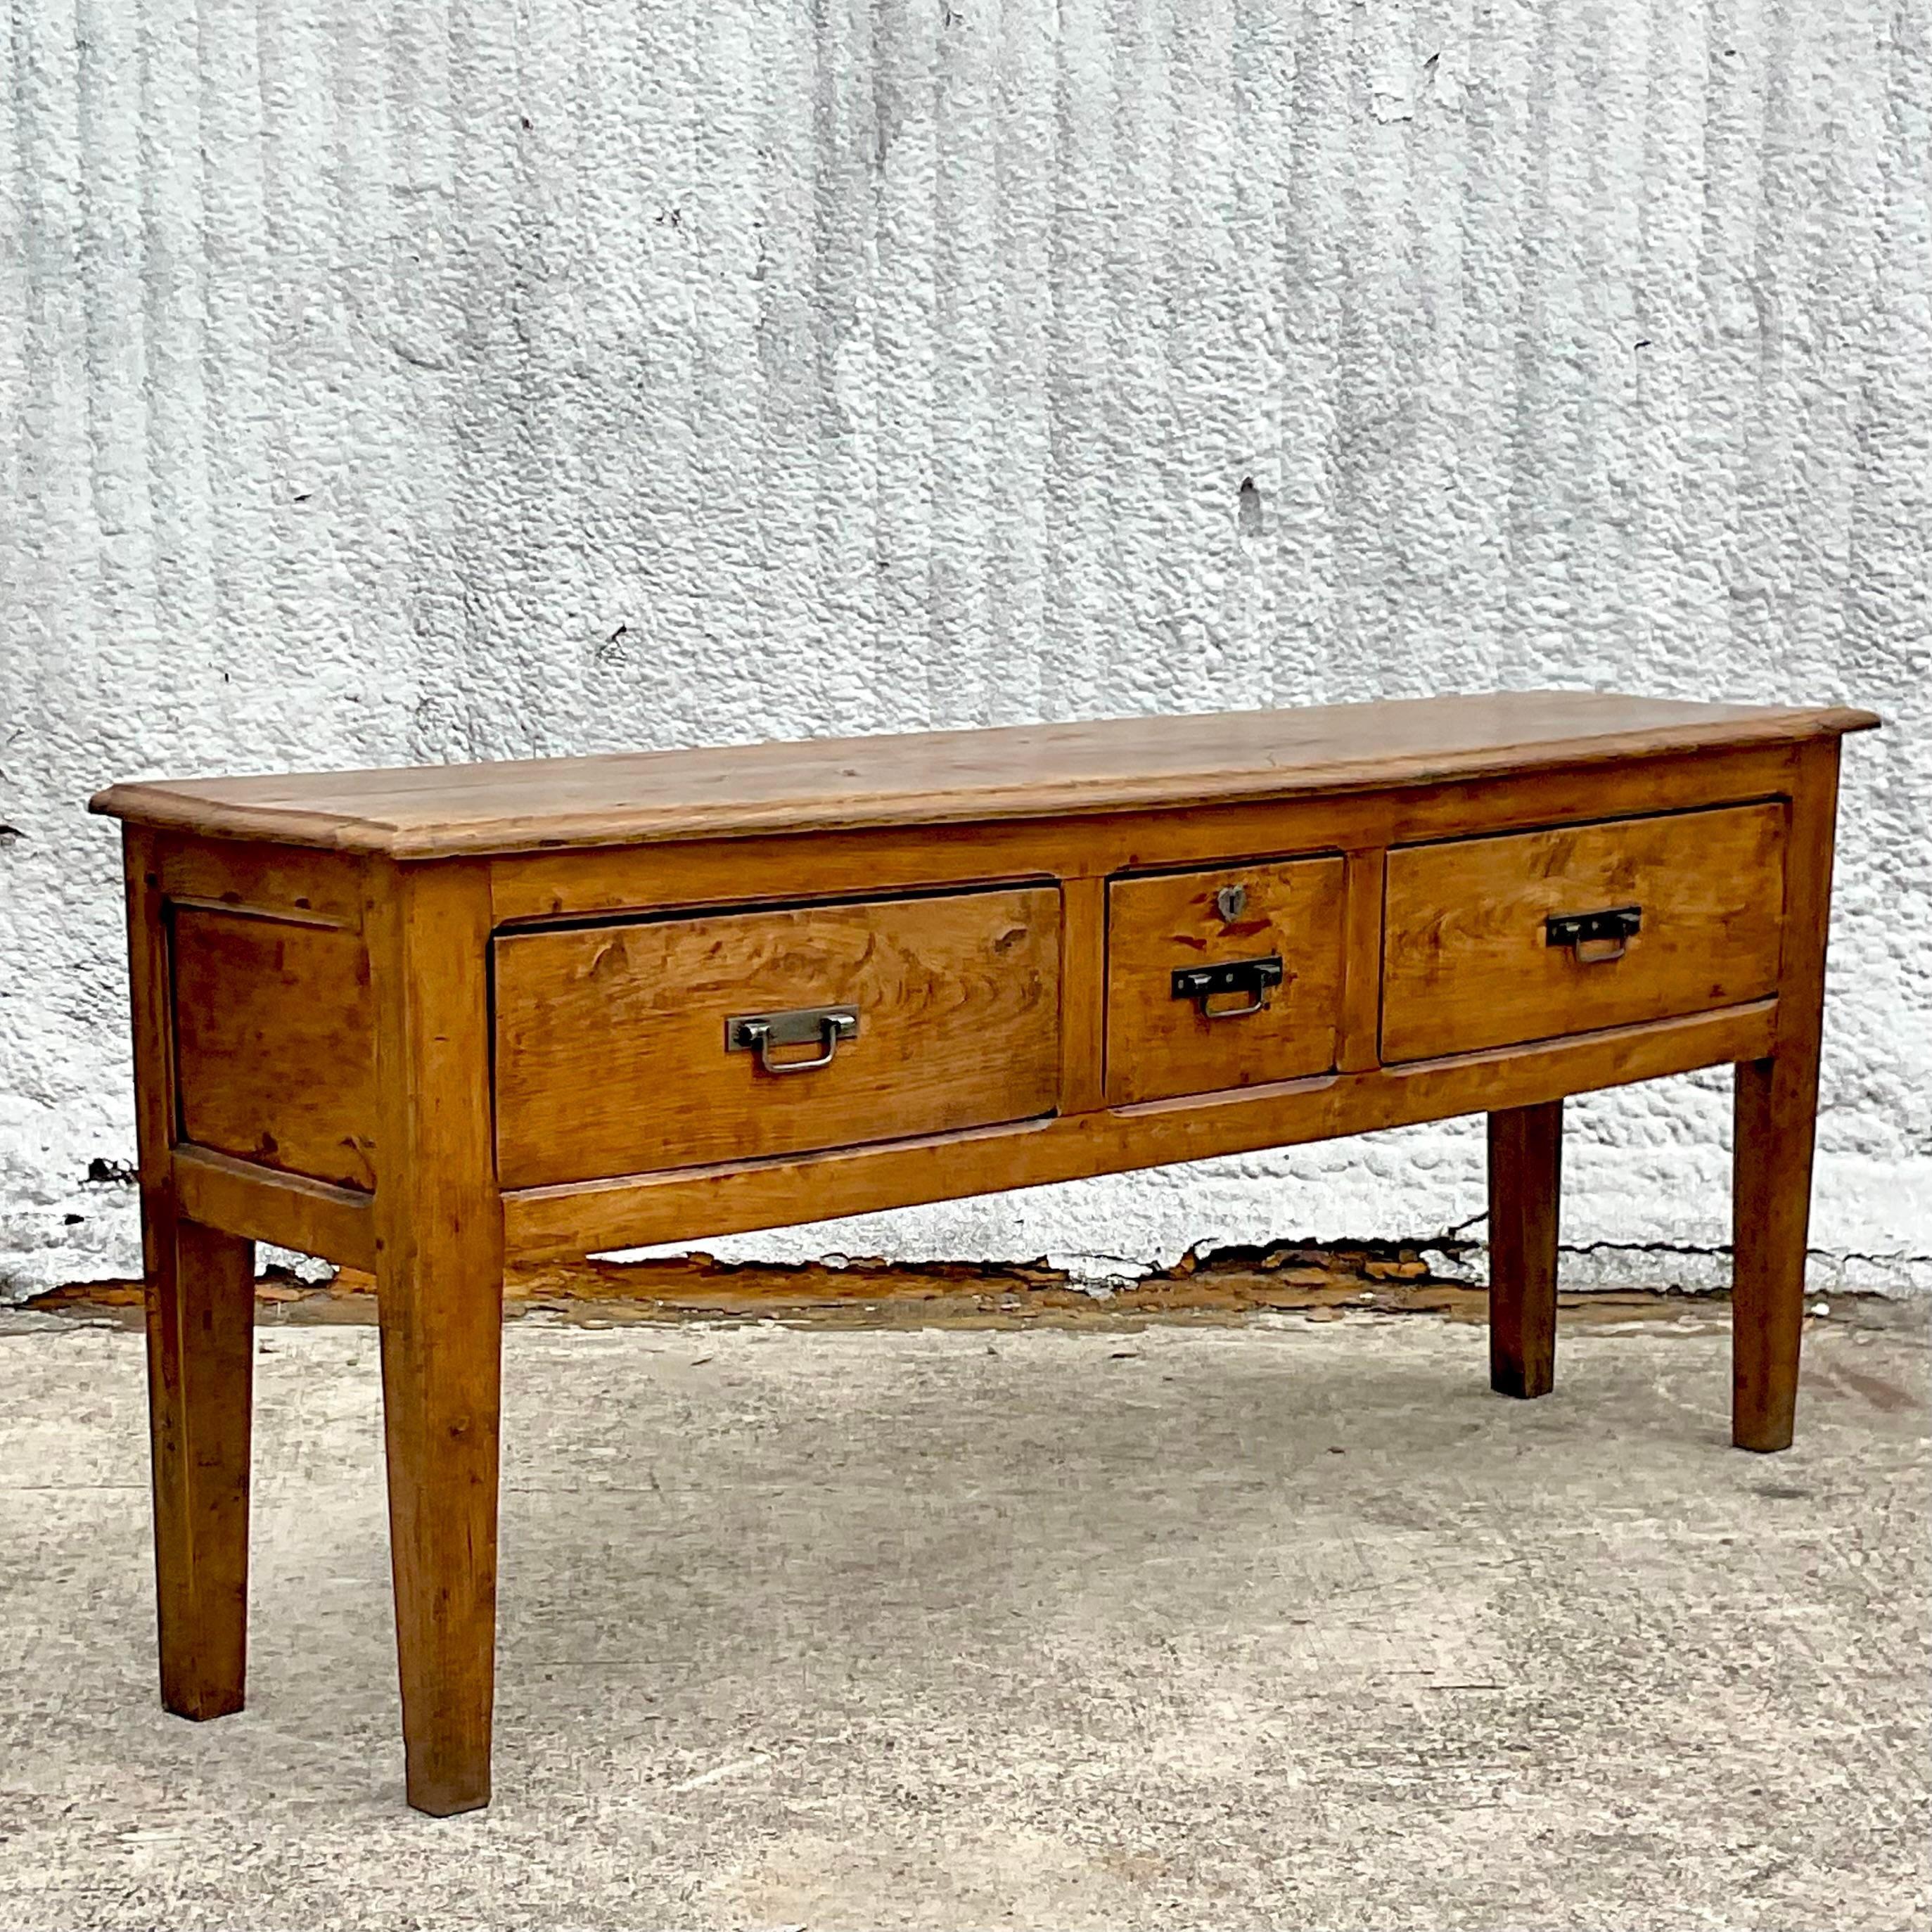 A stunning vintage Boho sideboard. A beautiful rustic frame that has been fully restored to its former glory. Perfect as a sideboard, but also beautiful as a console table. Lots of great storage. Acquired from a Palm Beach estate.